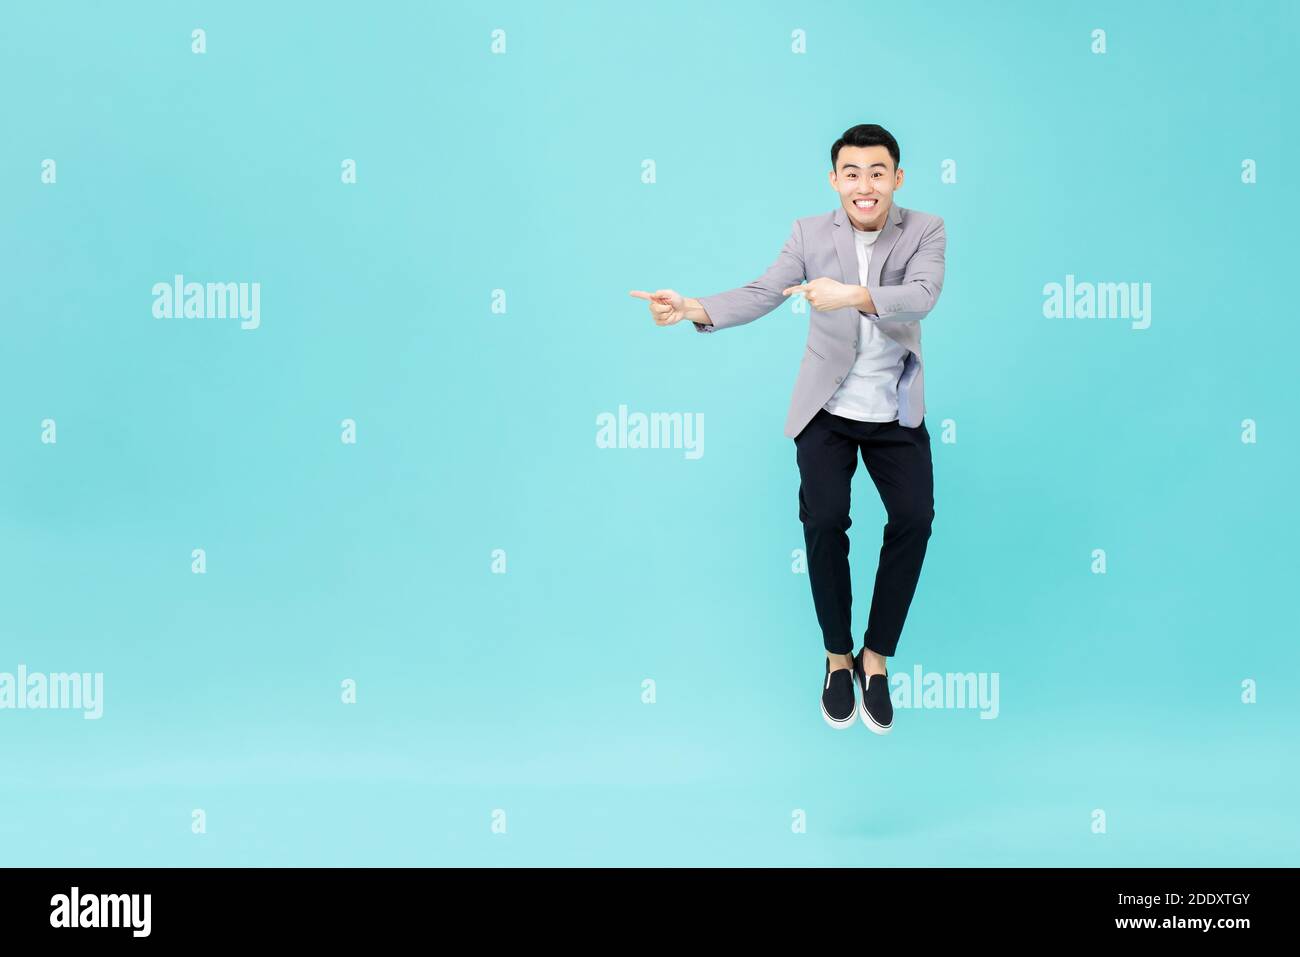 Young smiling Asian man with funny face jumping and pointing hands to copy space aside on studio light blue background Stock Photo